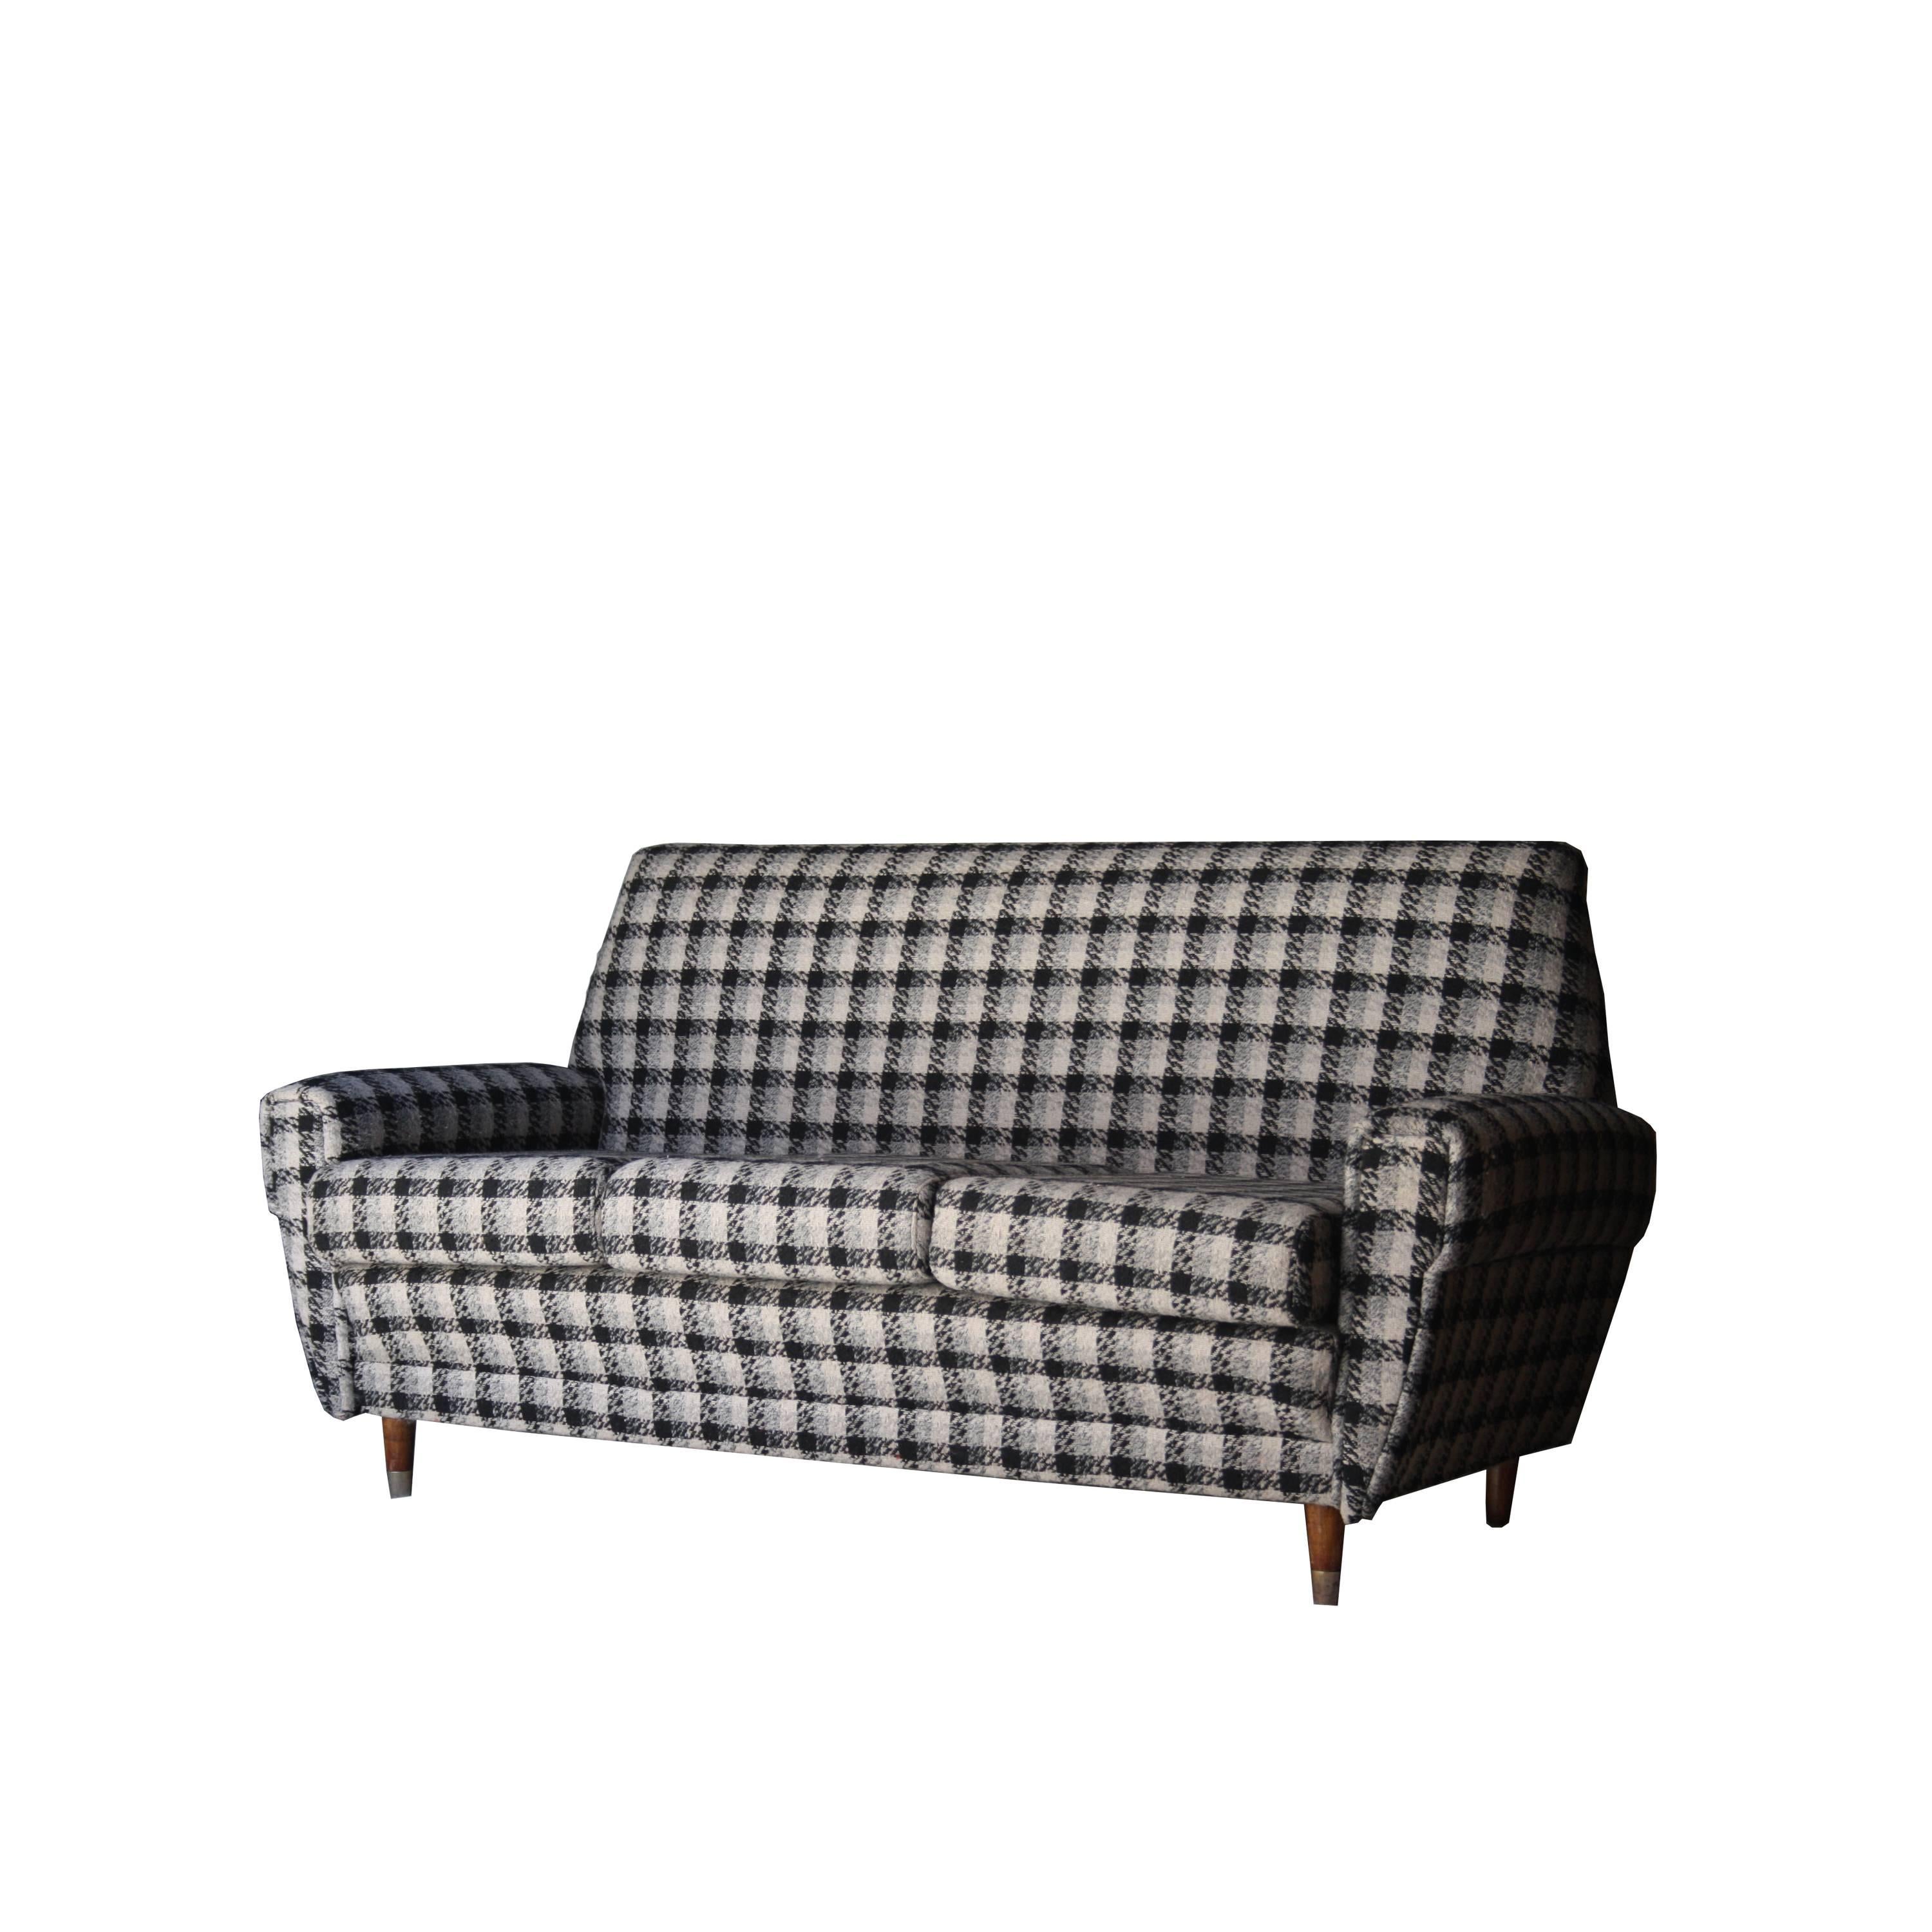 Three-seat sofa with structure in solid wood upholstered in cold wool type tweed with frame print.